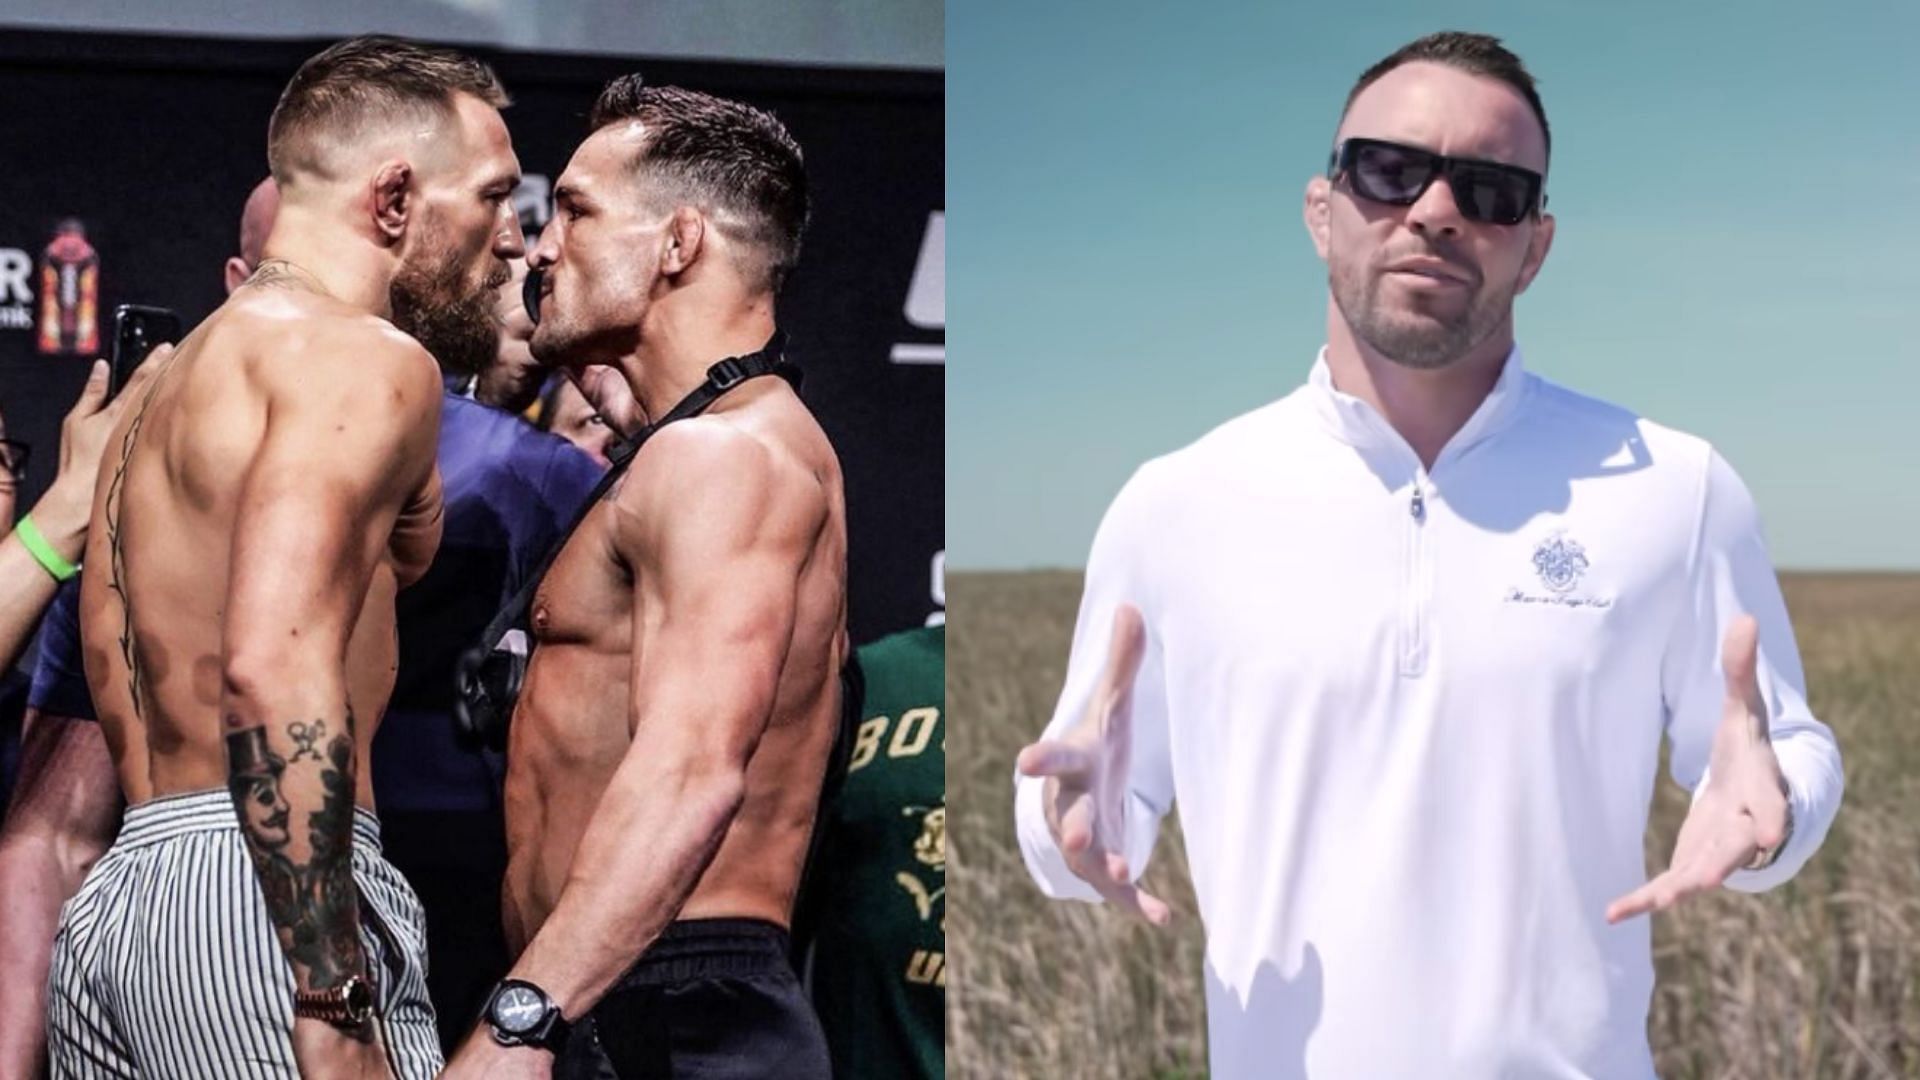 Conor McGregor &amp; Michael Chandler (left), Colby Covington (right) [Images courtesy of @mikechandlermma &amp; @colbycovington on Instagram]